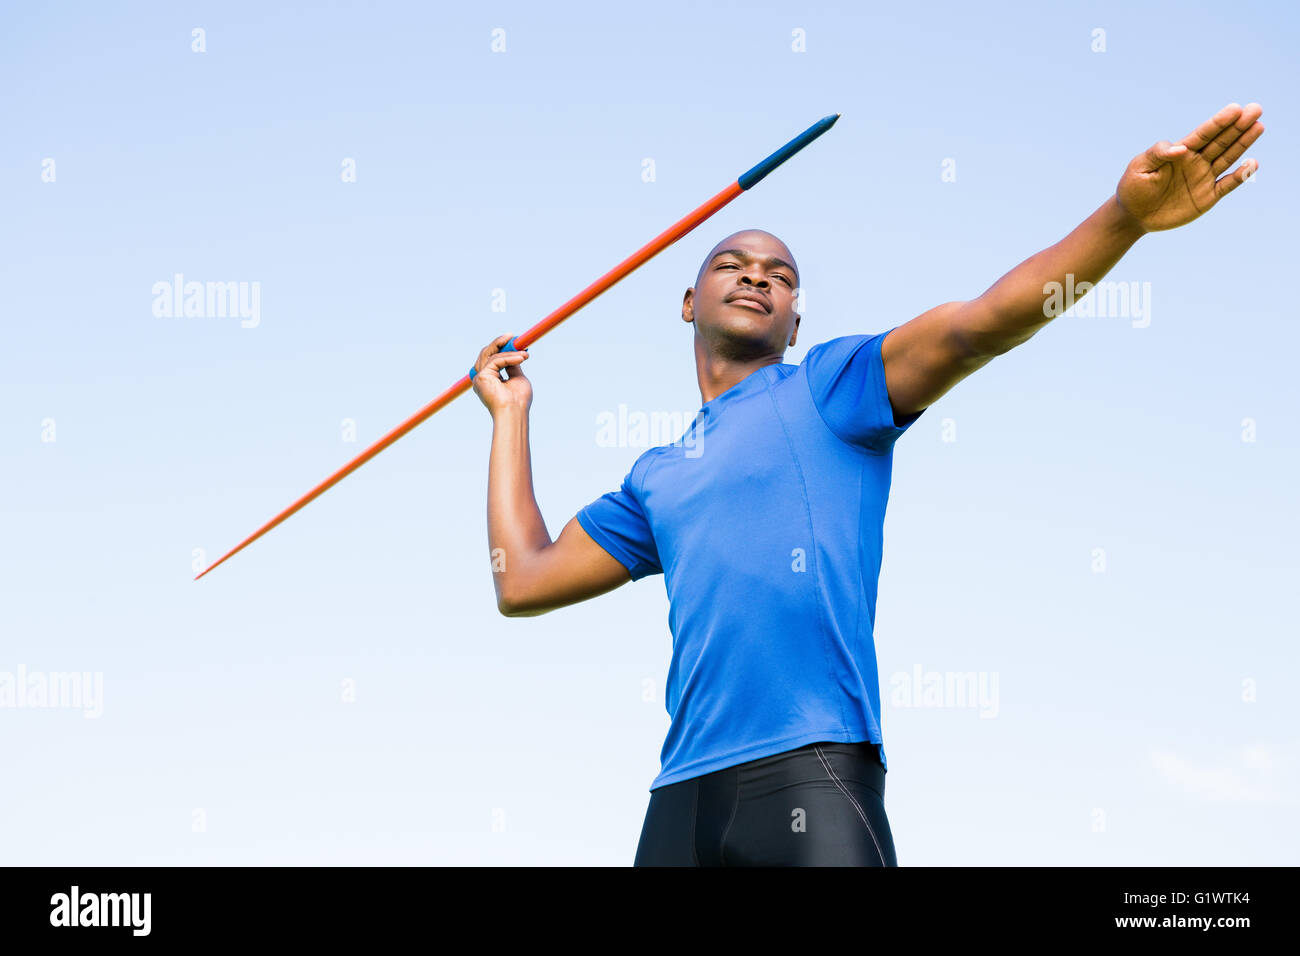 Athlete about to throw a javelin Stock Photo